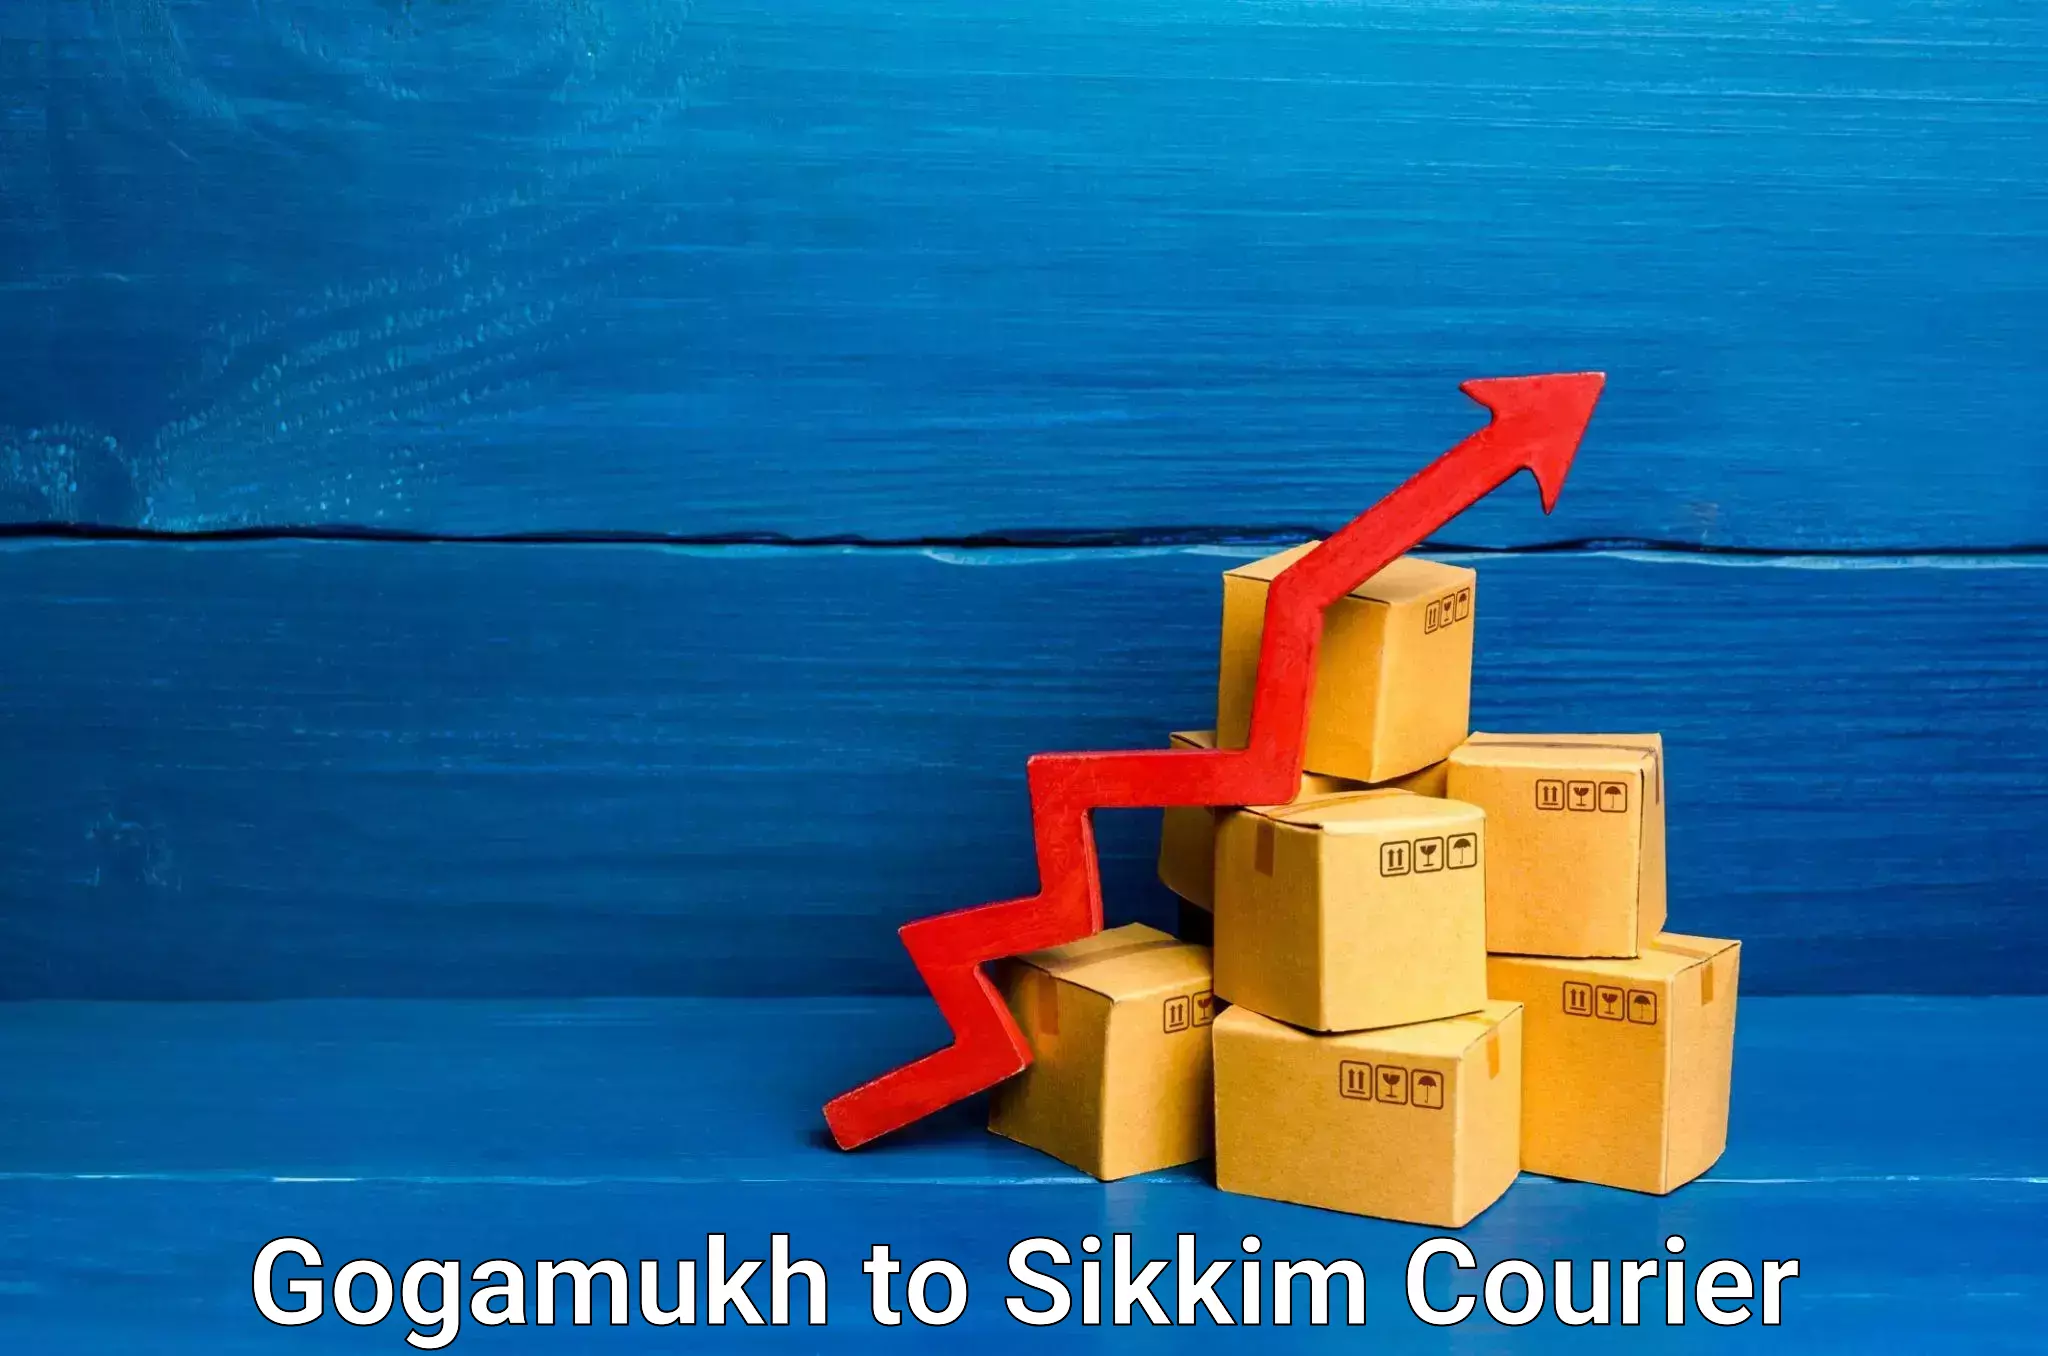 Automated parcel services Gogamukh to Sikkim